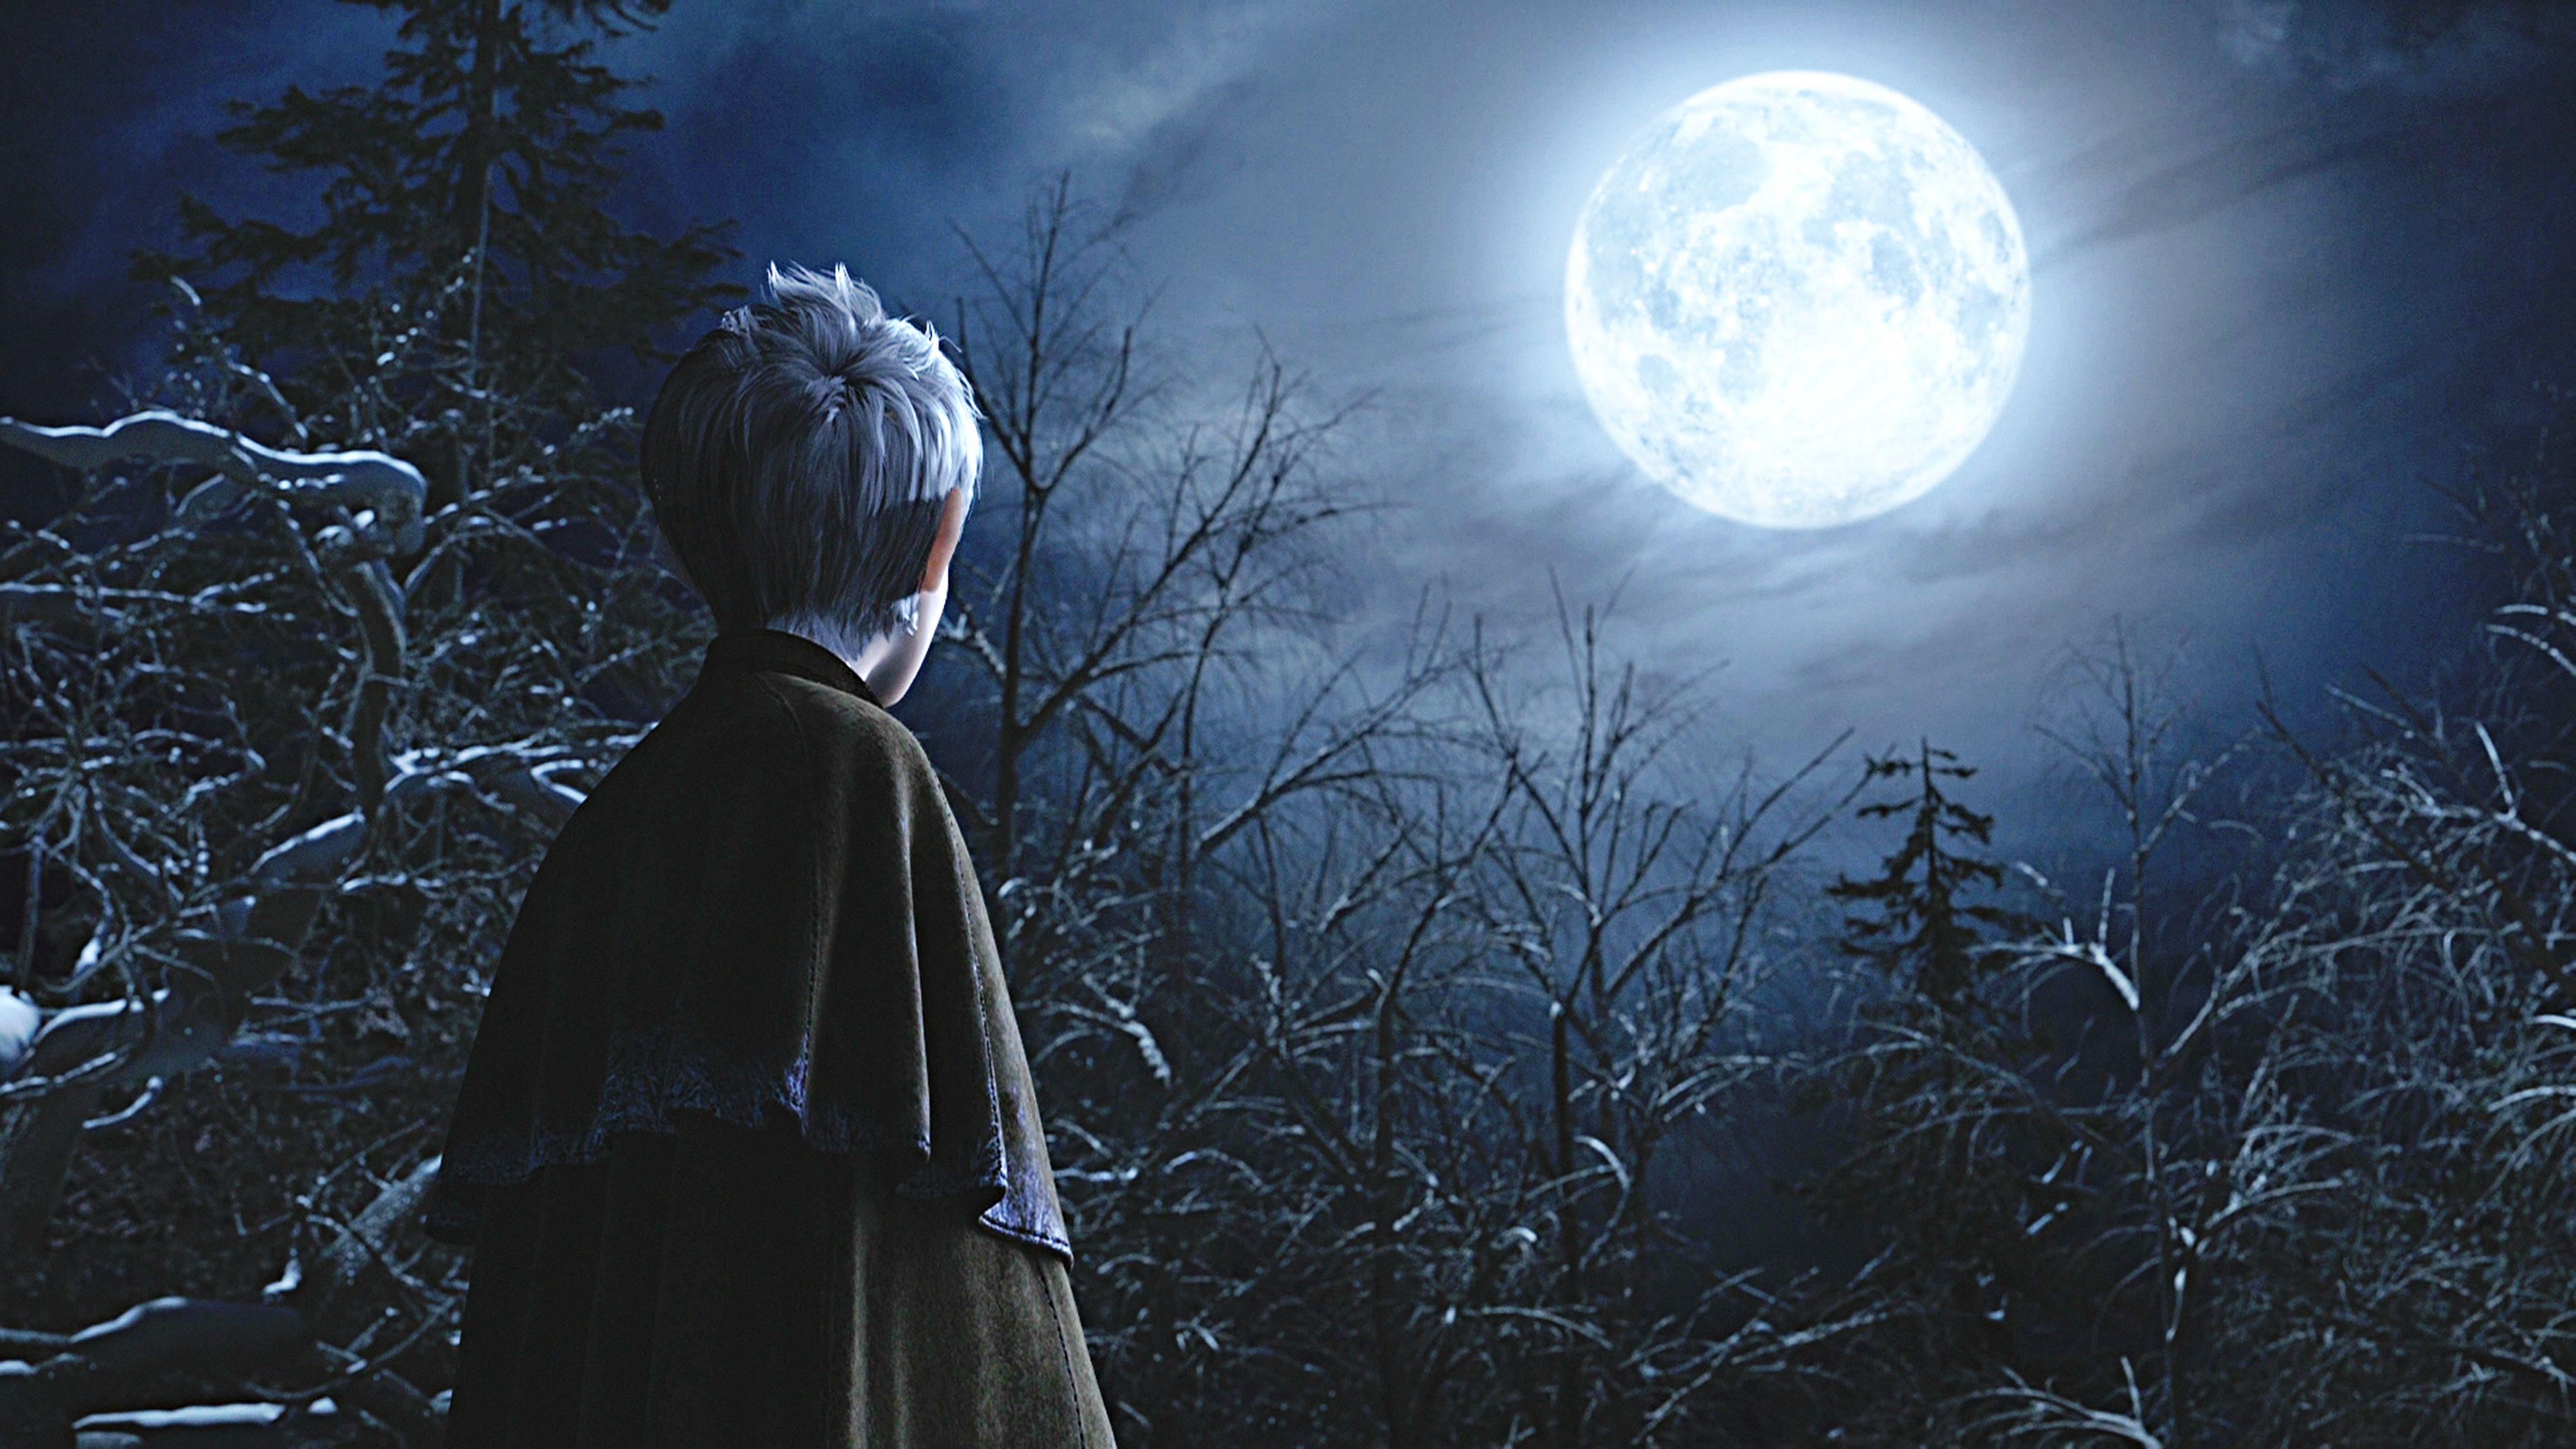 Rise Of The Guardians Wallpaper